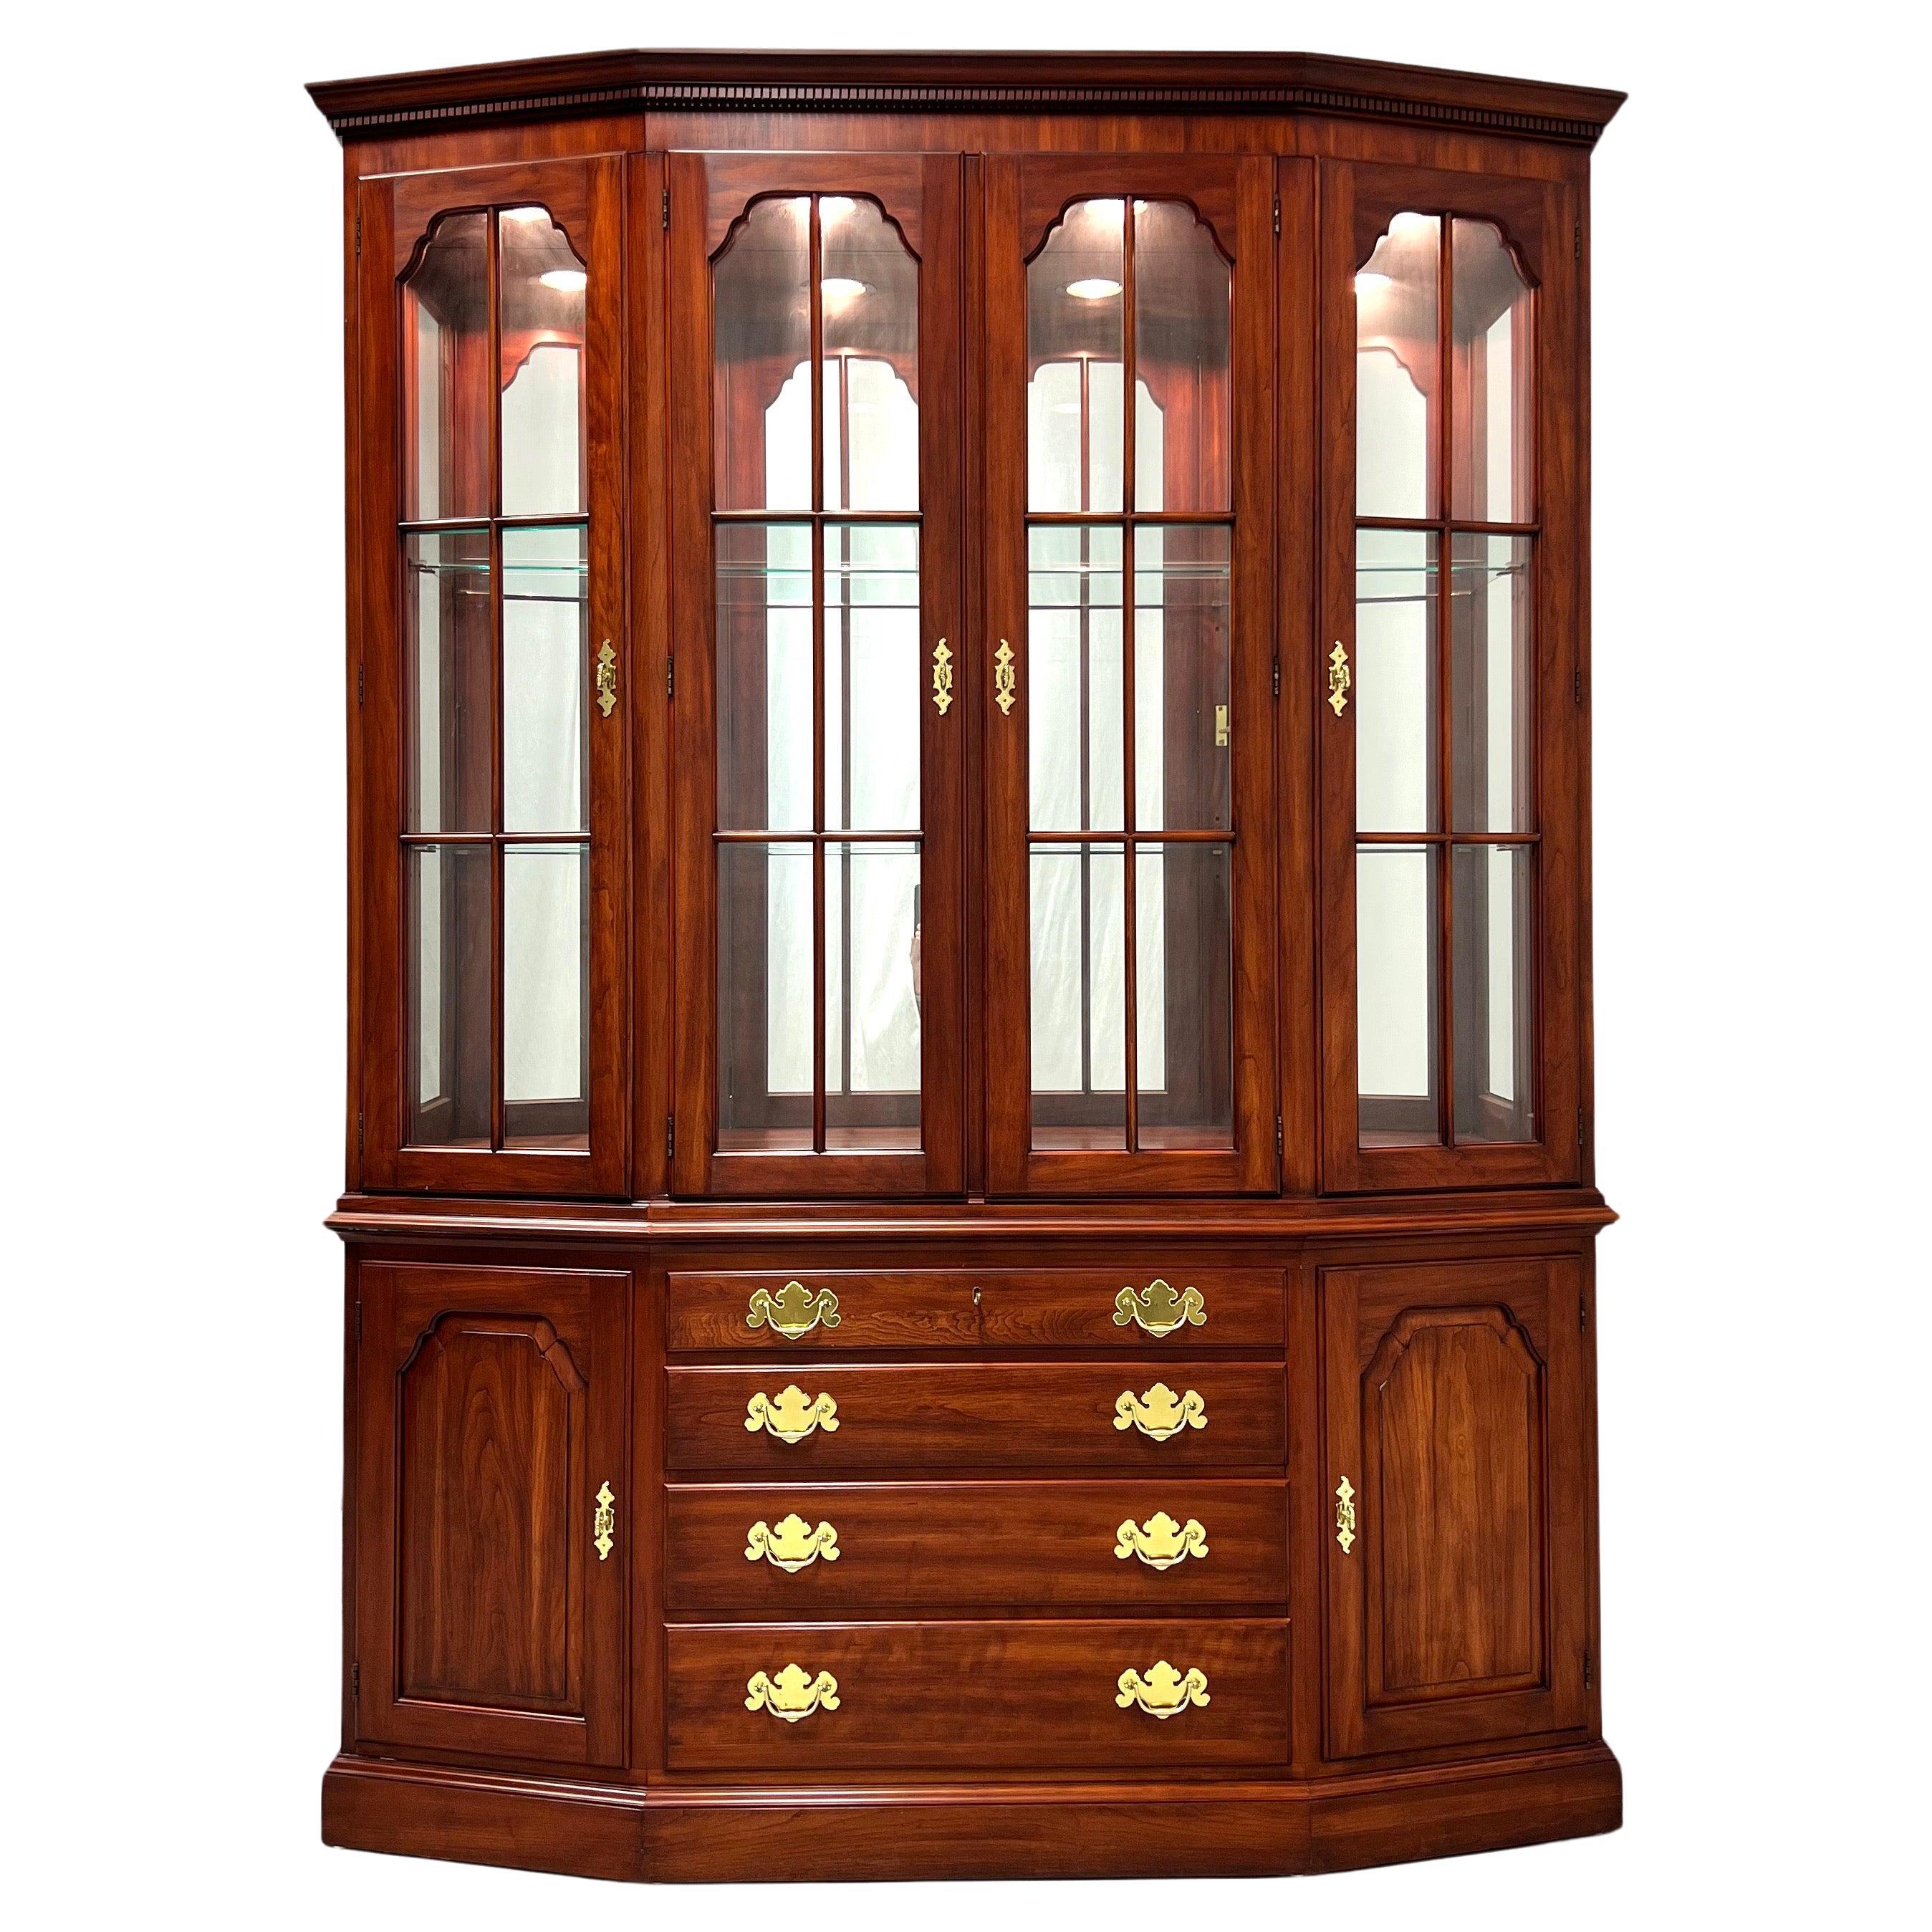 HENKEL HARRIS 2364 24 Solid Wild Black Cherry Traditional Canted China Cabinet For Sale